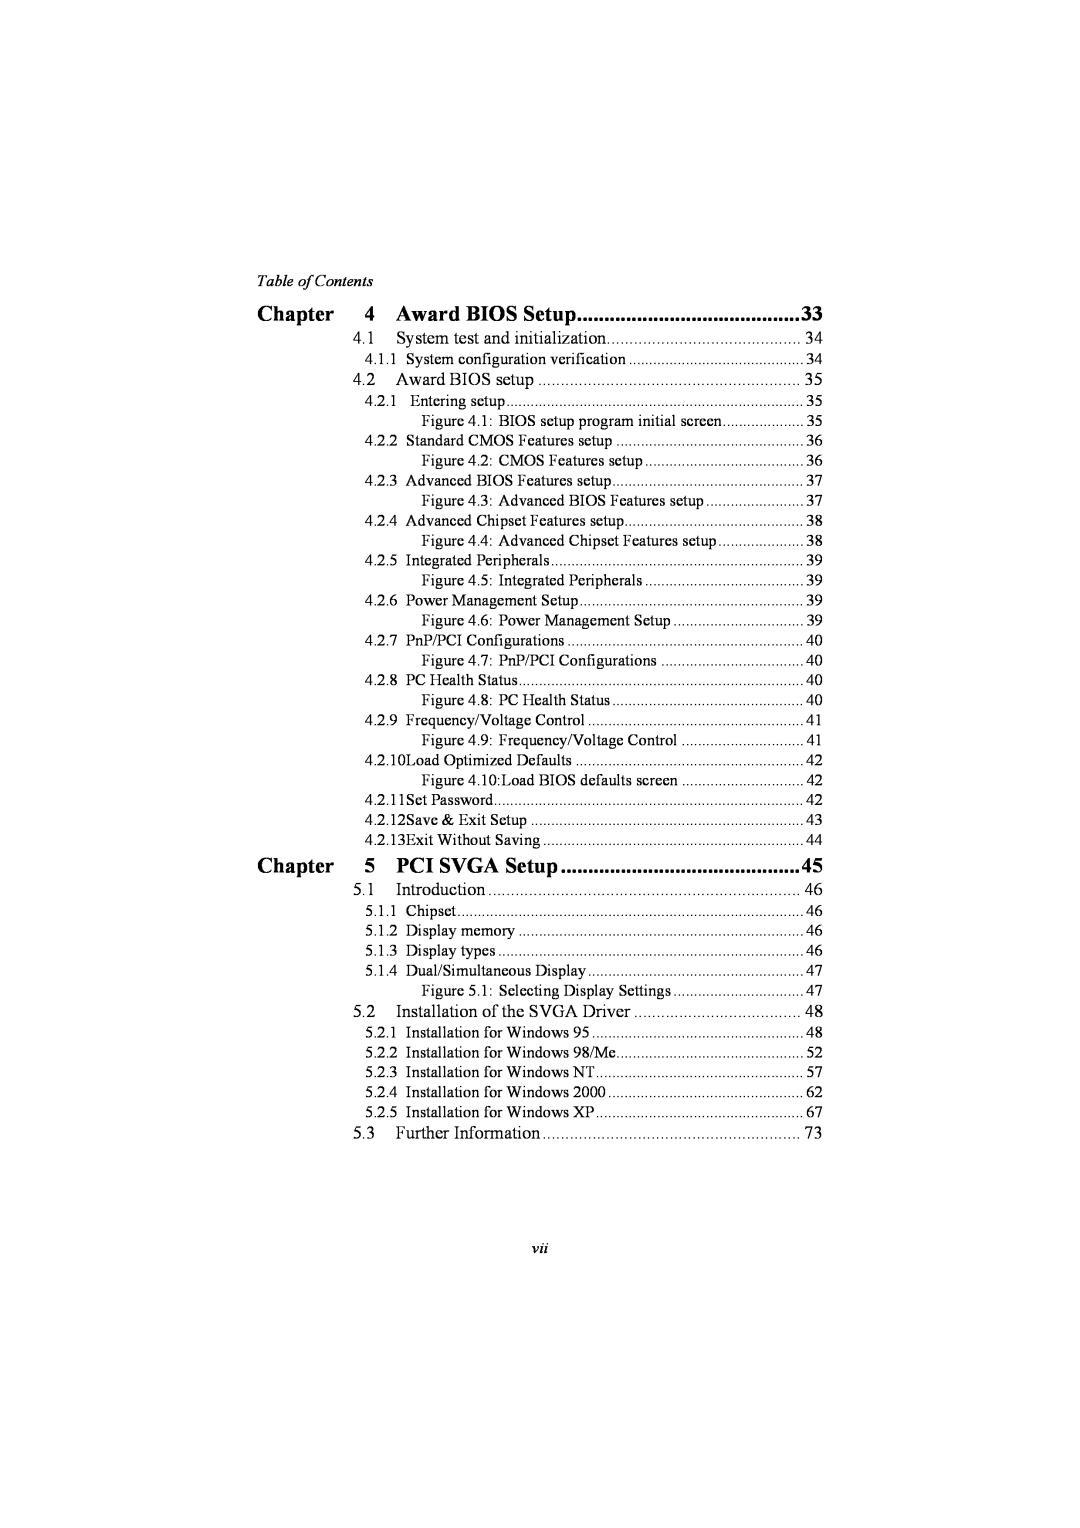 IBM 100/10, PCM-9575 user manual Table of Contents, 4.1.1 